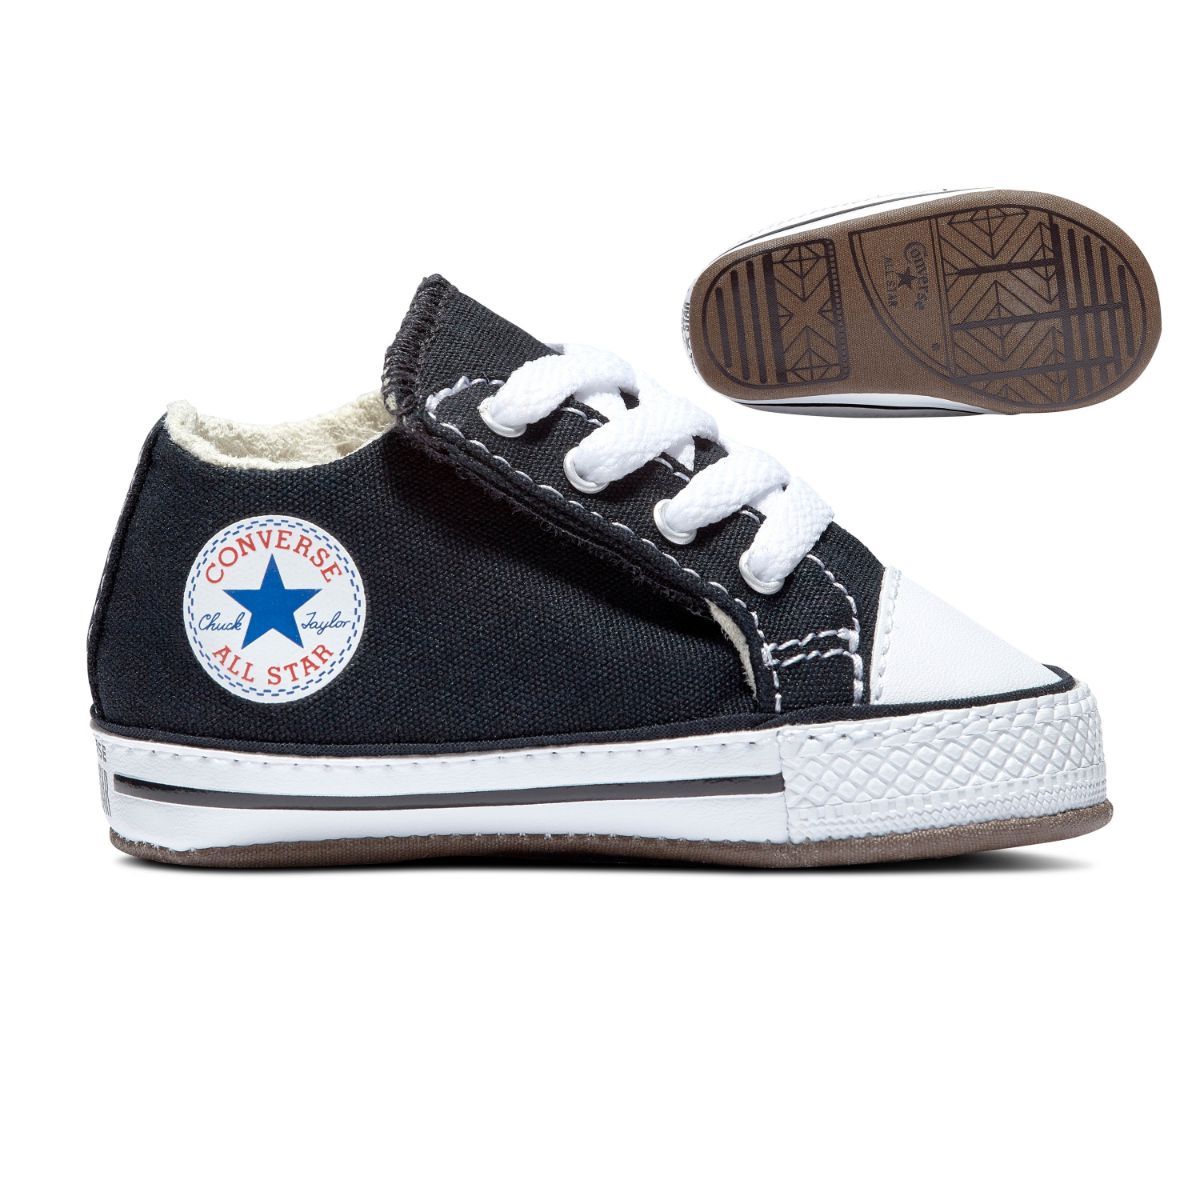 Converse Infant Chuck Taylor All Star Black Cribster